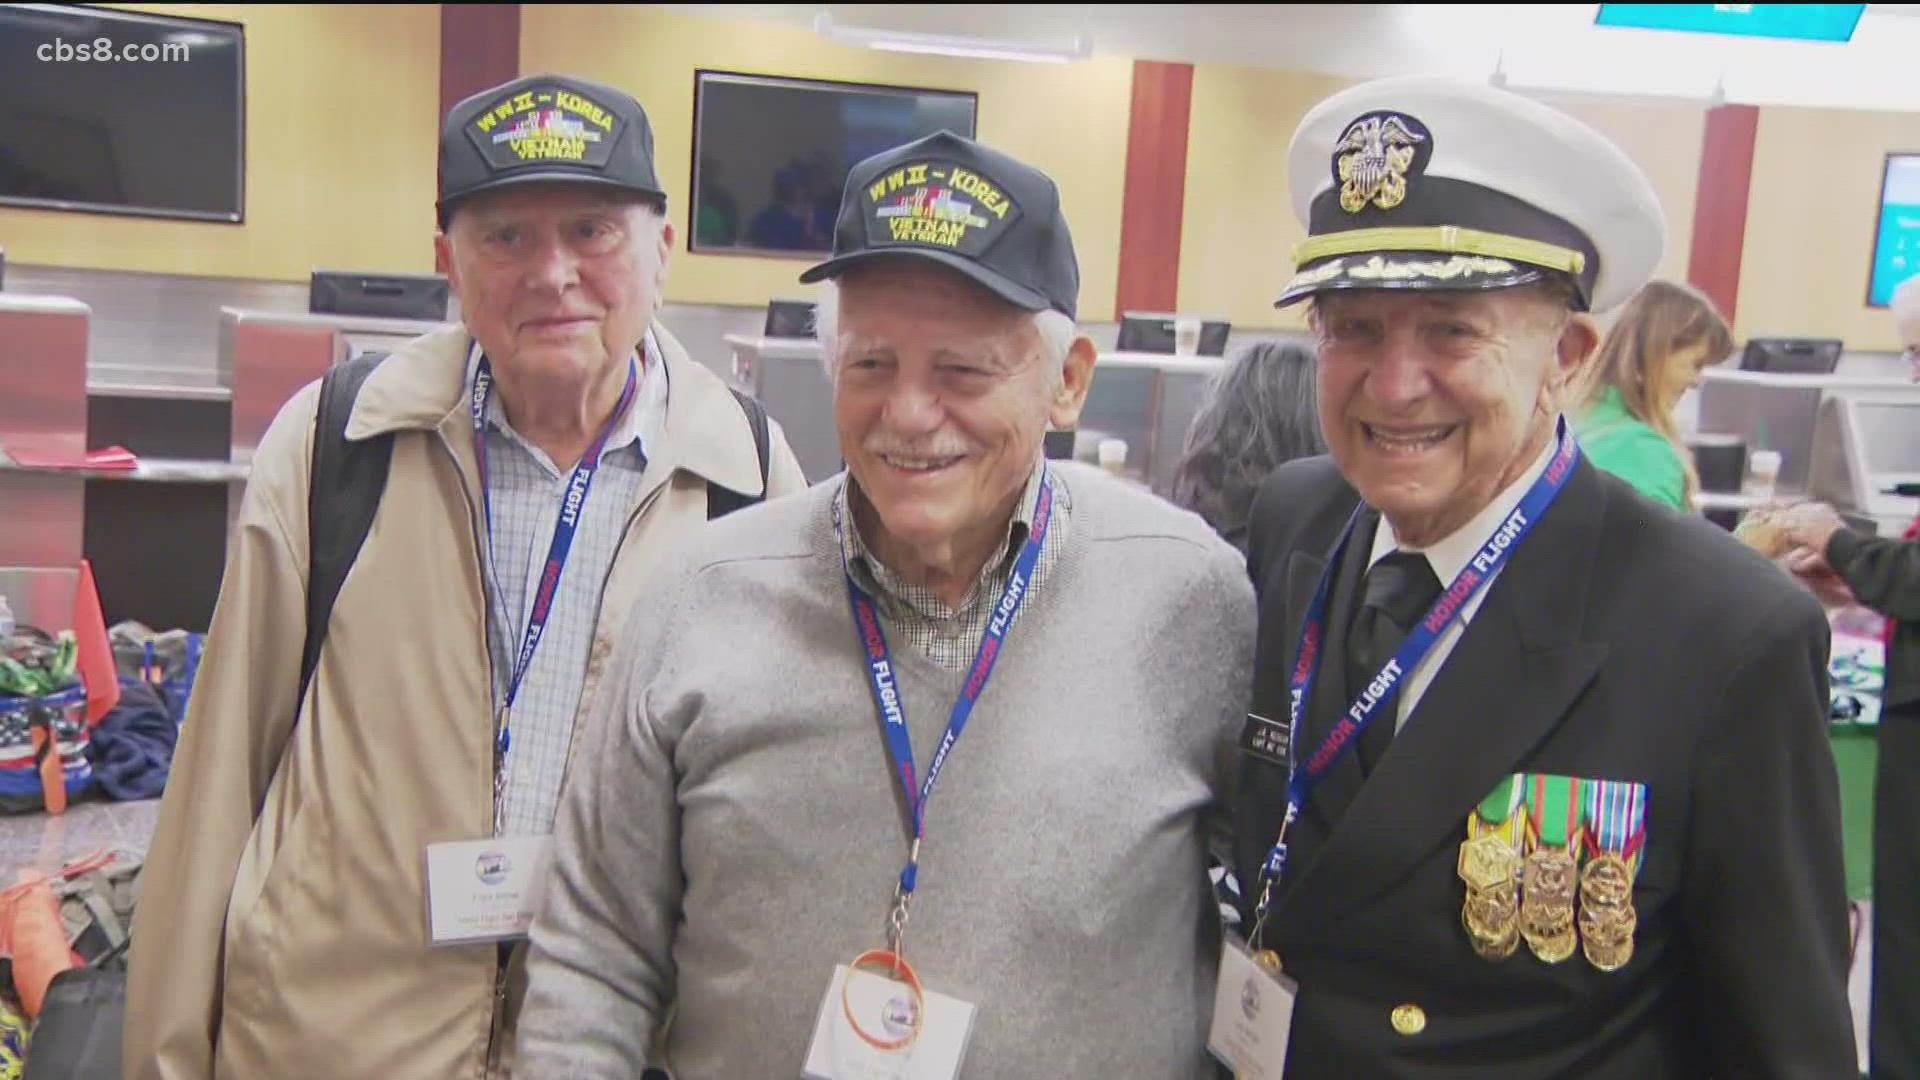 Over 150 World War II and Korean War veterans gathered Sunday to commemorate the 76th anniversary of the end of World War II.